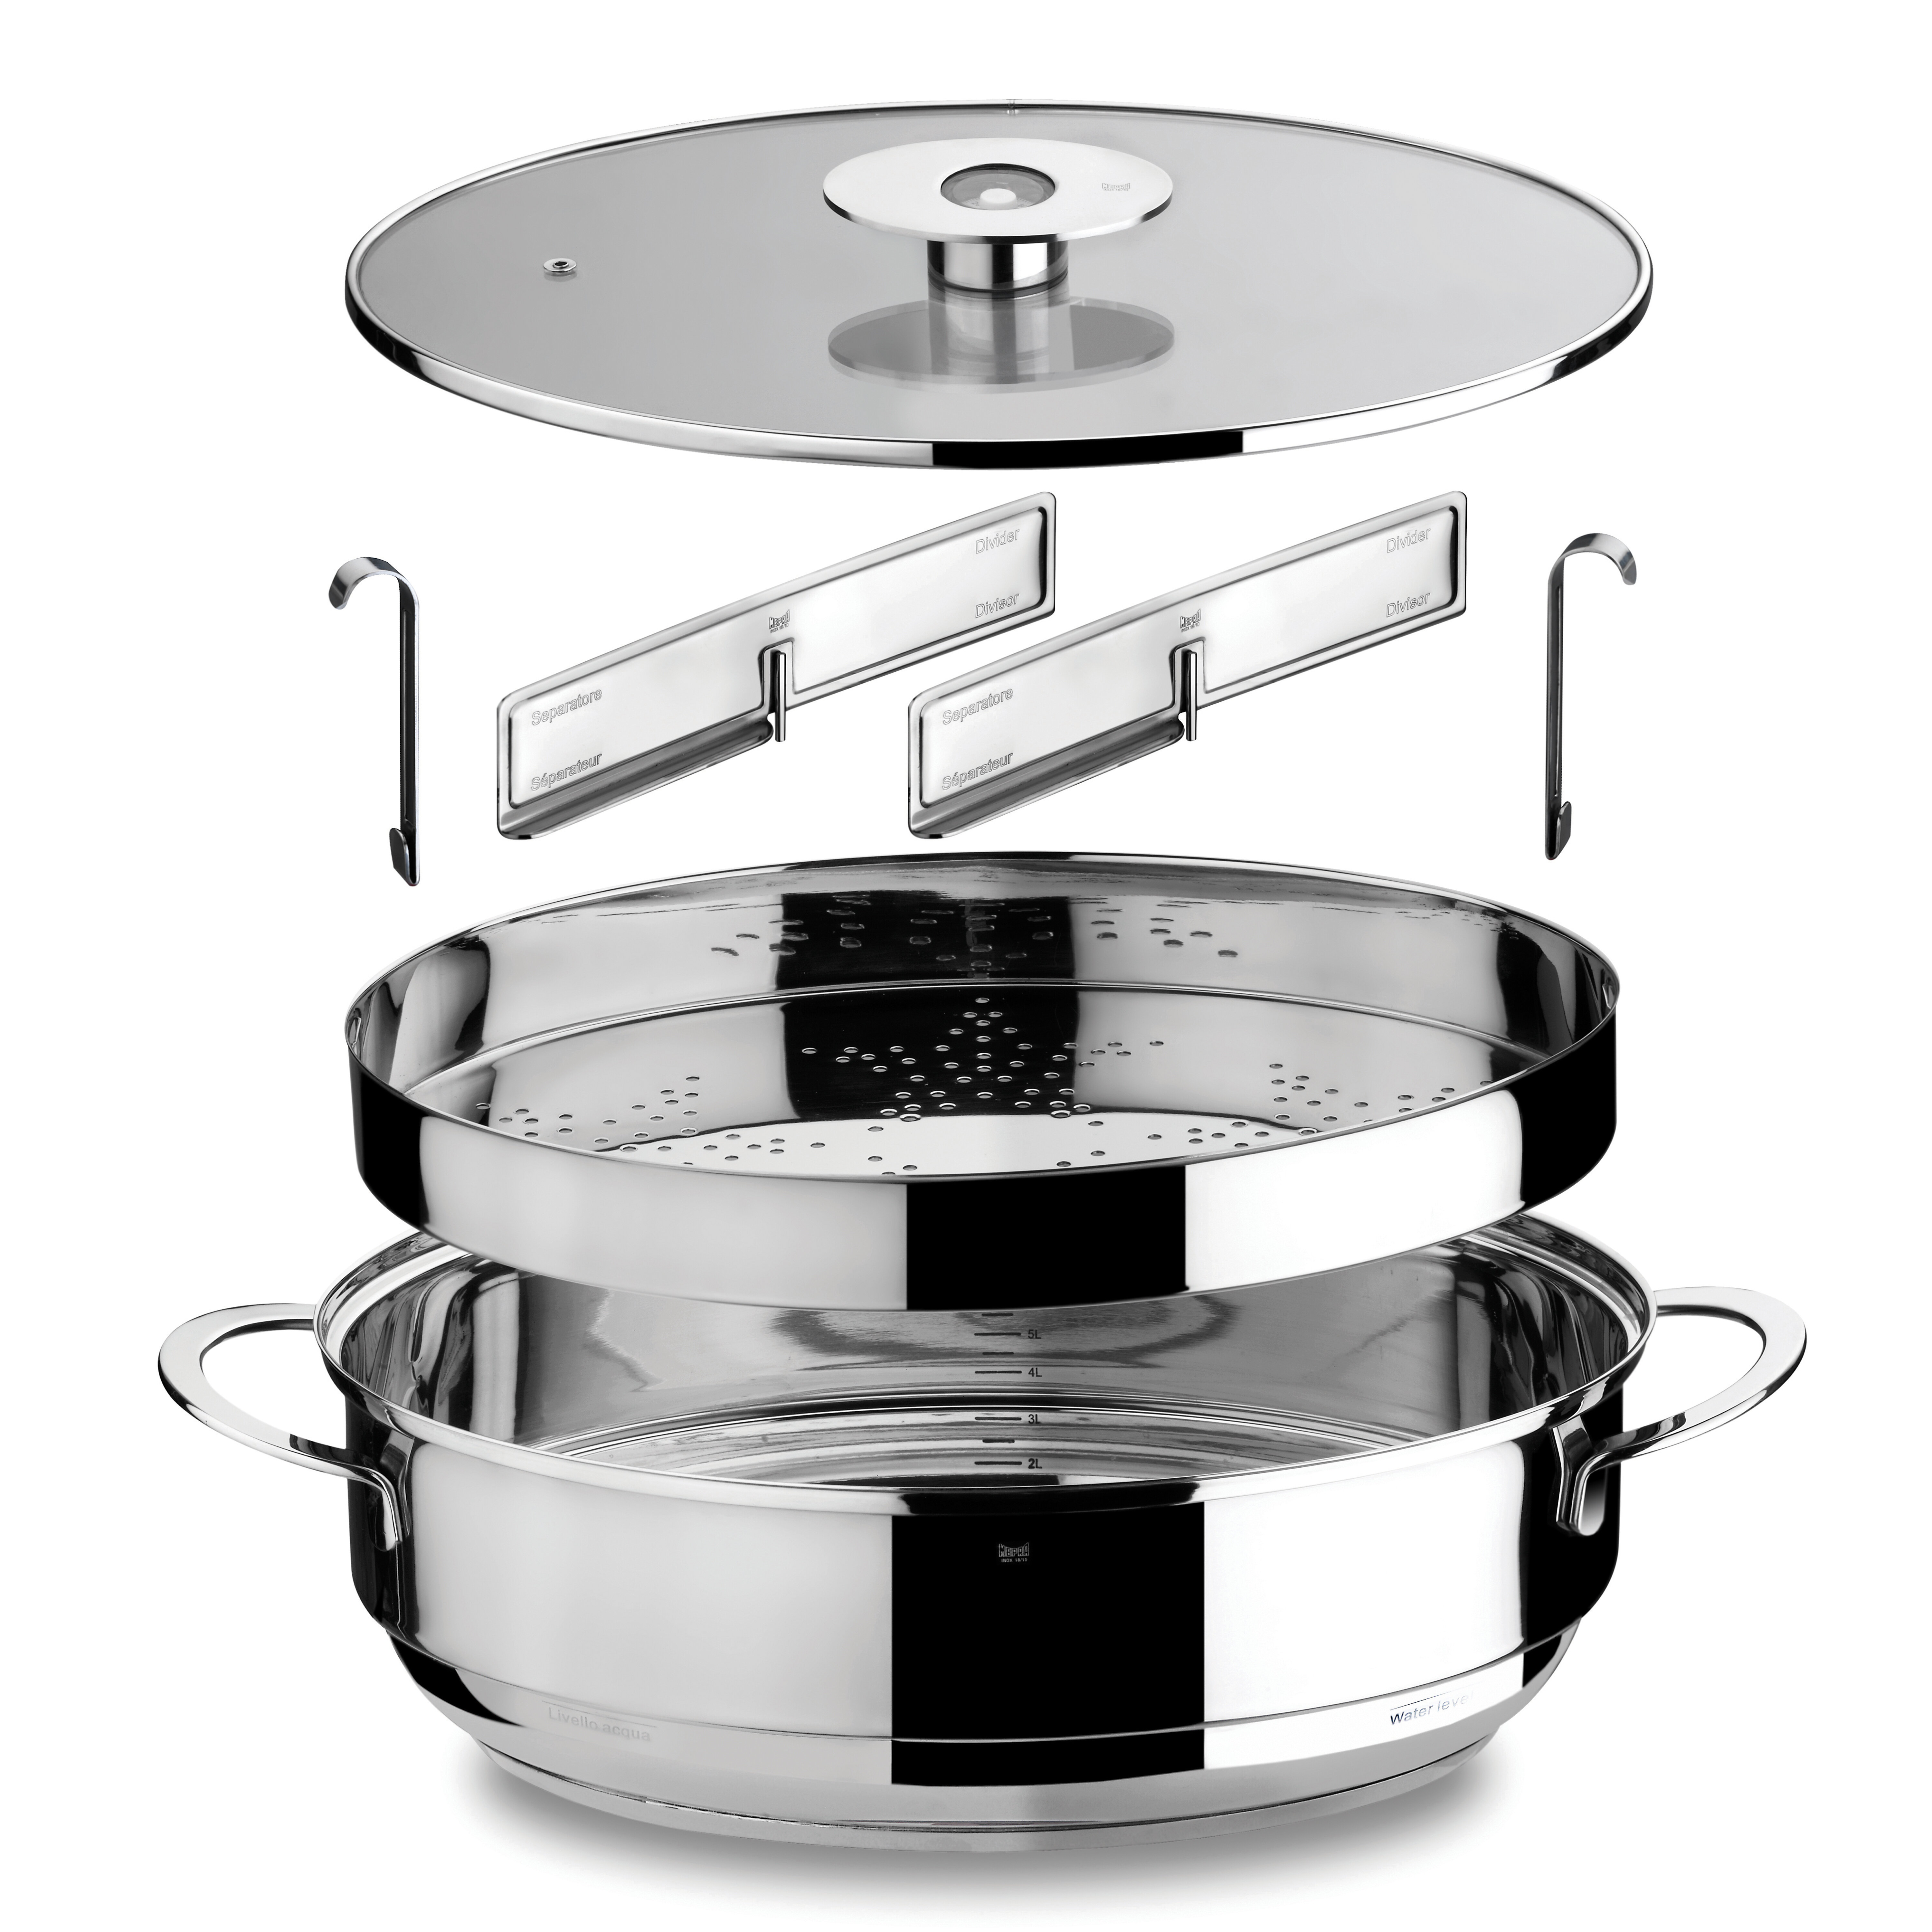 Mepra Oval Deep Casserole with Lid and Grill Stainless Steel & Reviews